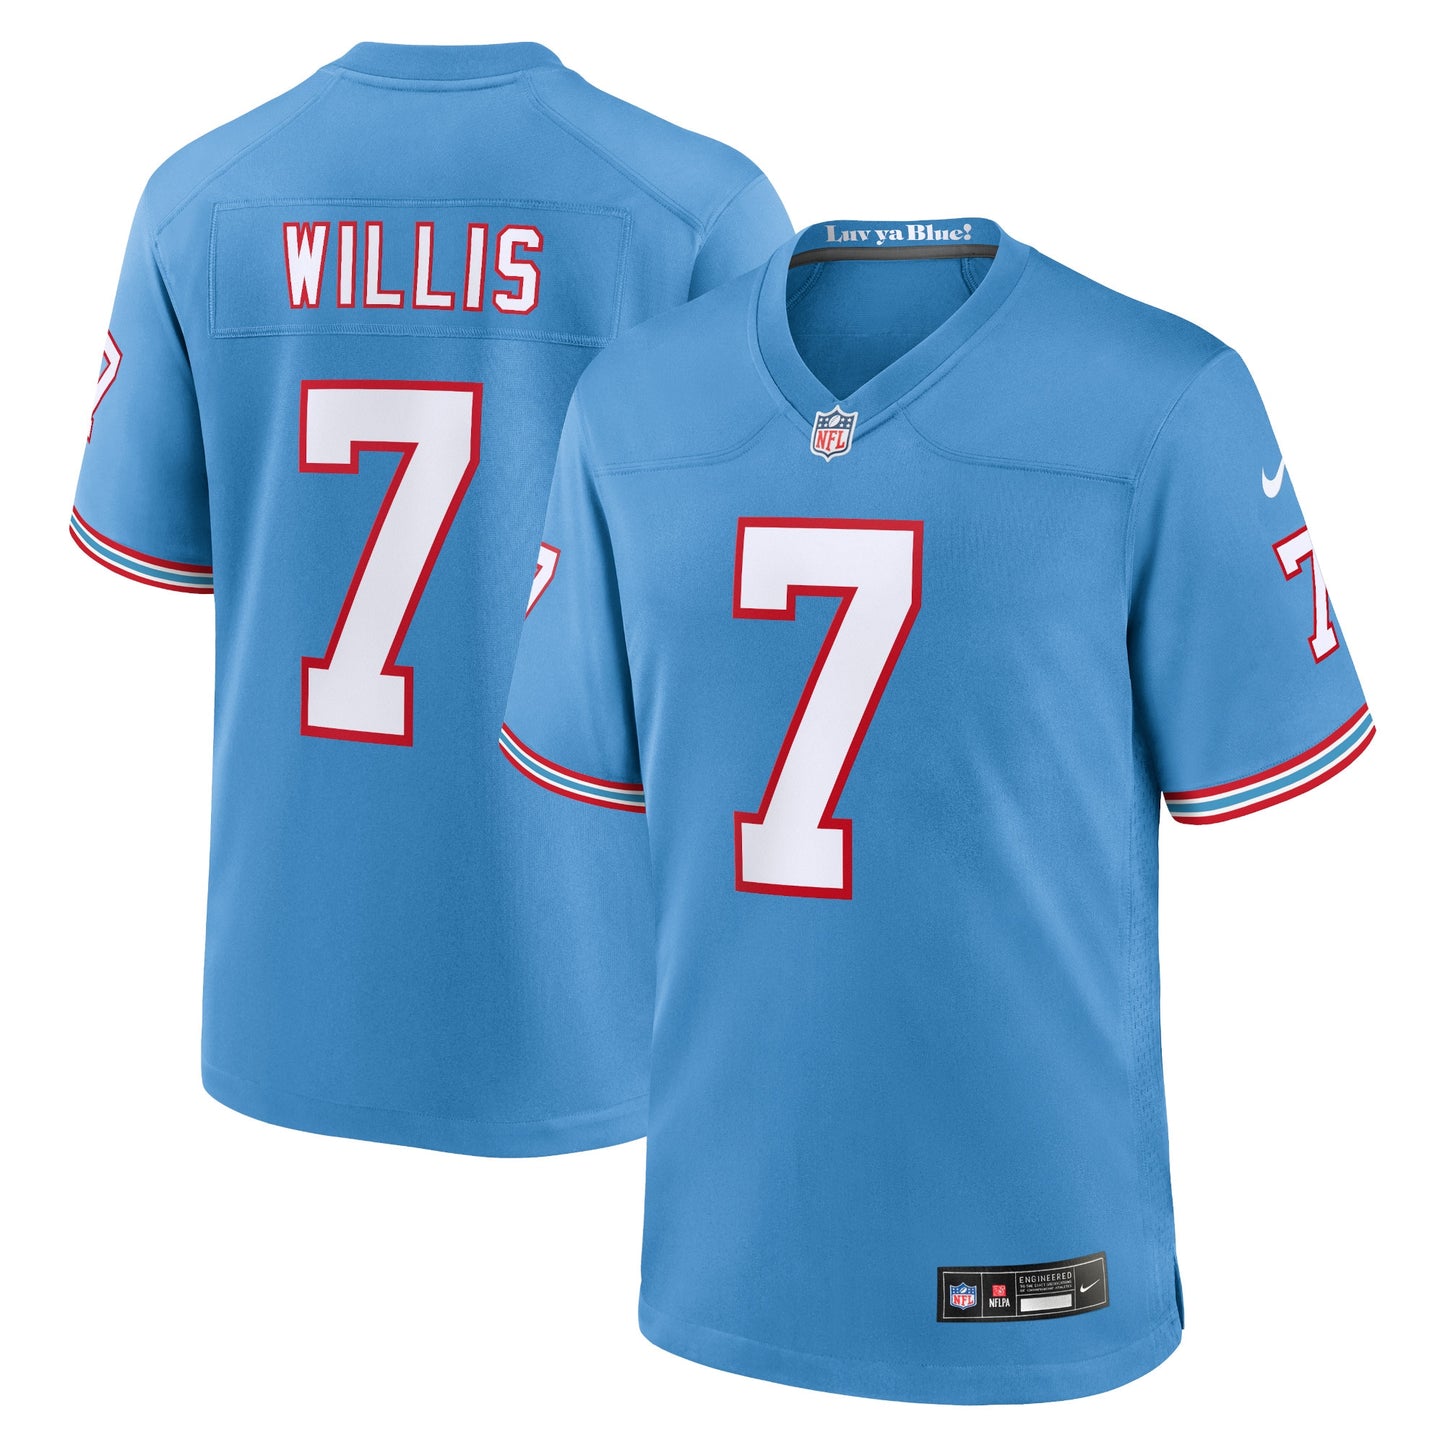 Malik Willis Tennessee Titans Nike Youth Game Jersey - Light Blue